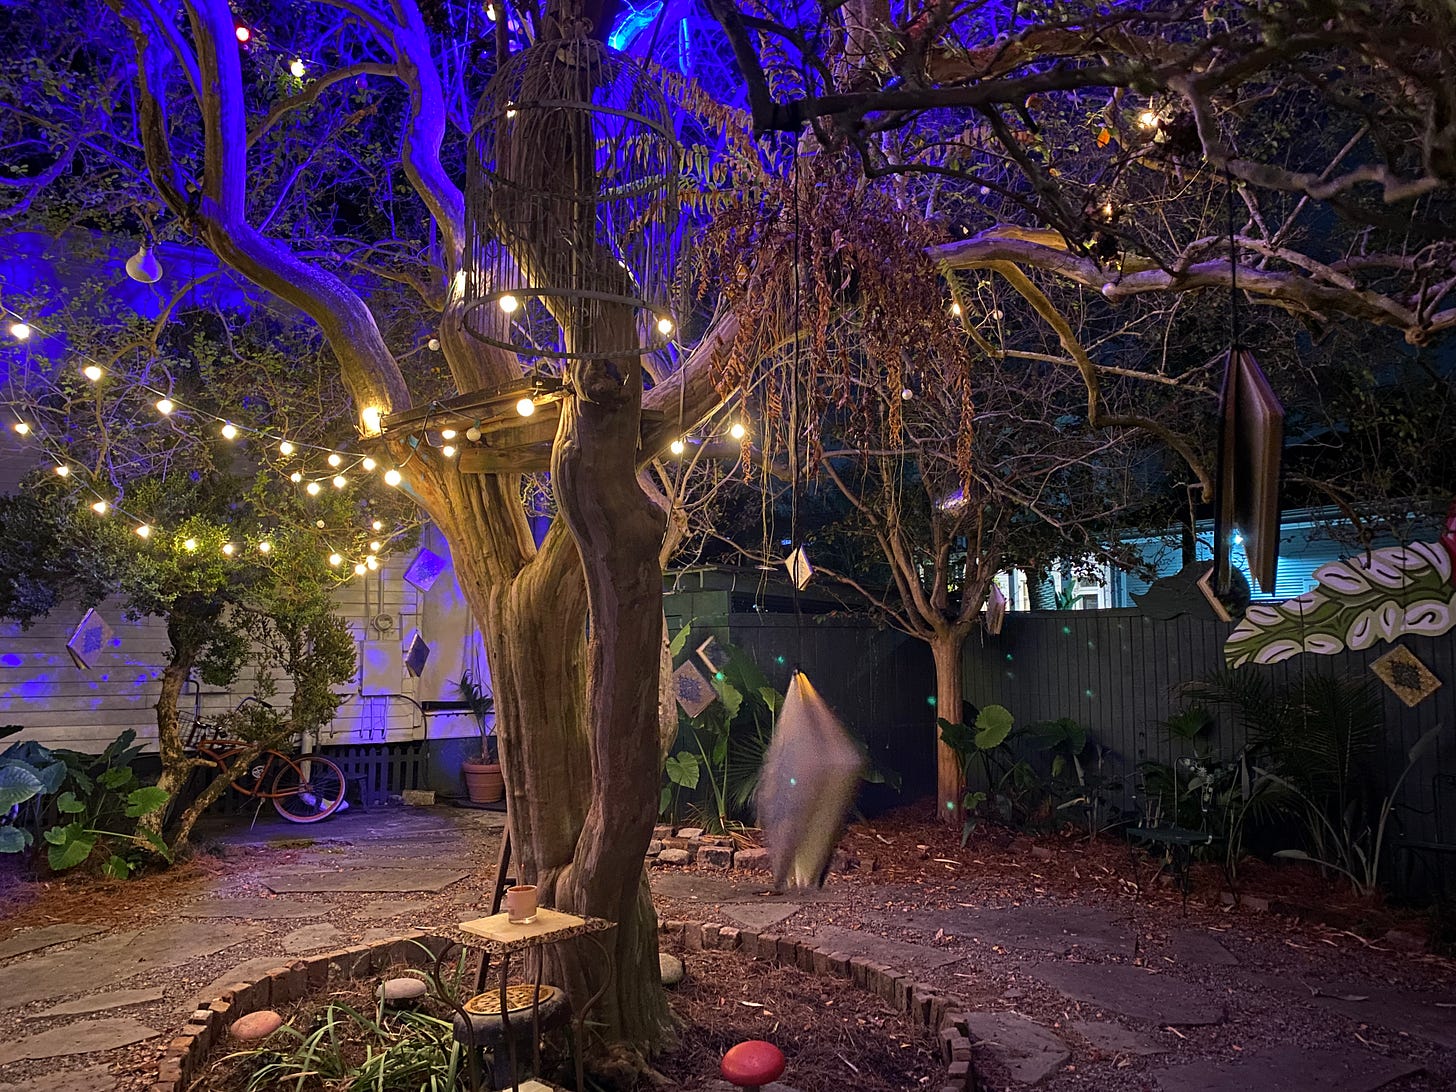 A tree in a courtyard, covered in fairy lights, with grimoires hanging from its branches